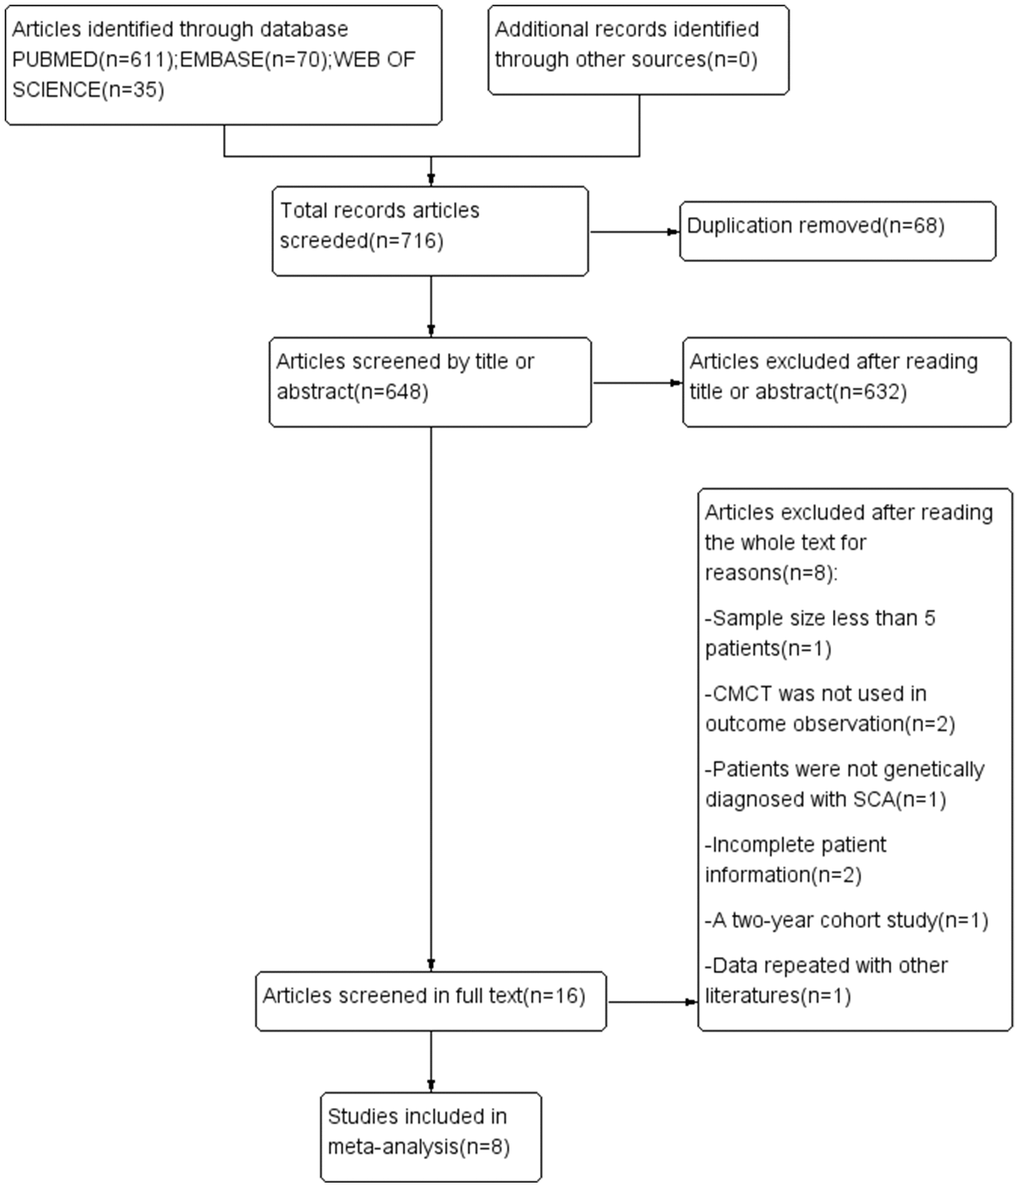 PRISMA flowchart of the studies included in the meta-analysis. SCA, spinocerebellar ataxia; CMCT, central motor conduction time.